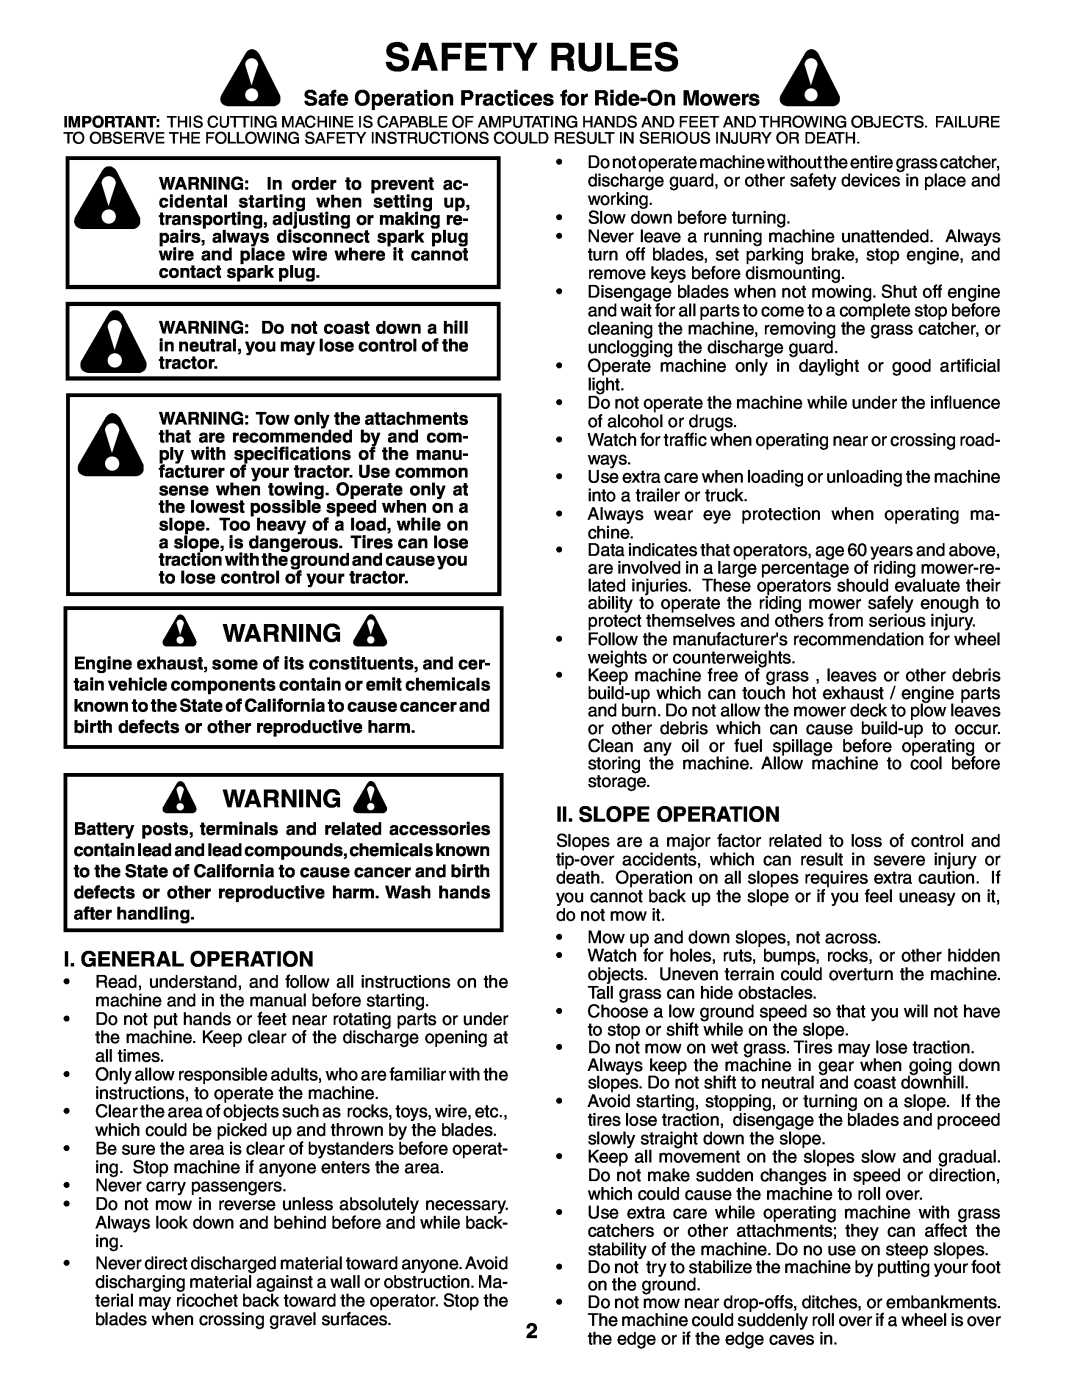 Poulan 195506 manual Safety Rules, Safe Operation Practices for Ride-OnMowers, I. General Operation, Ii. Slope Operation 